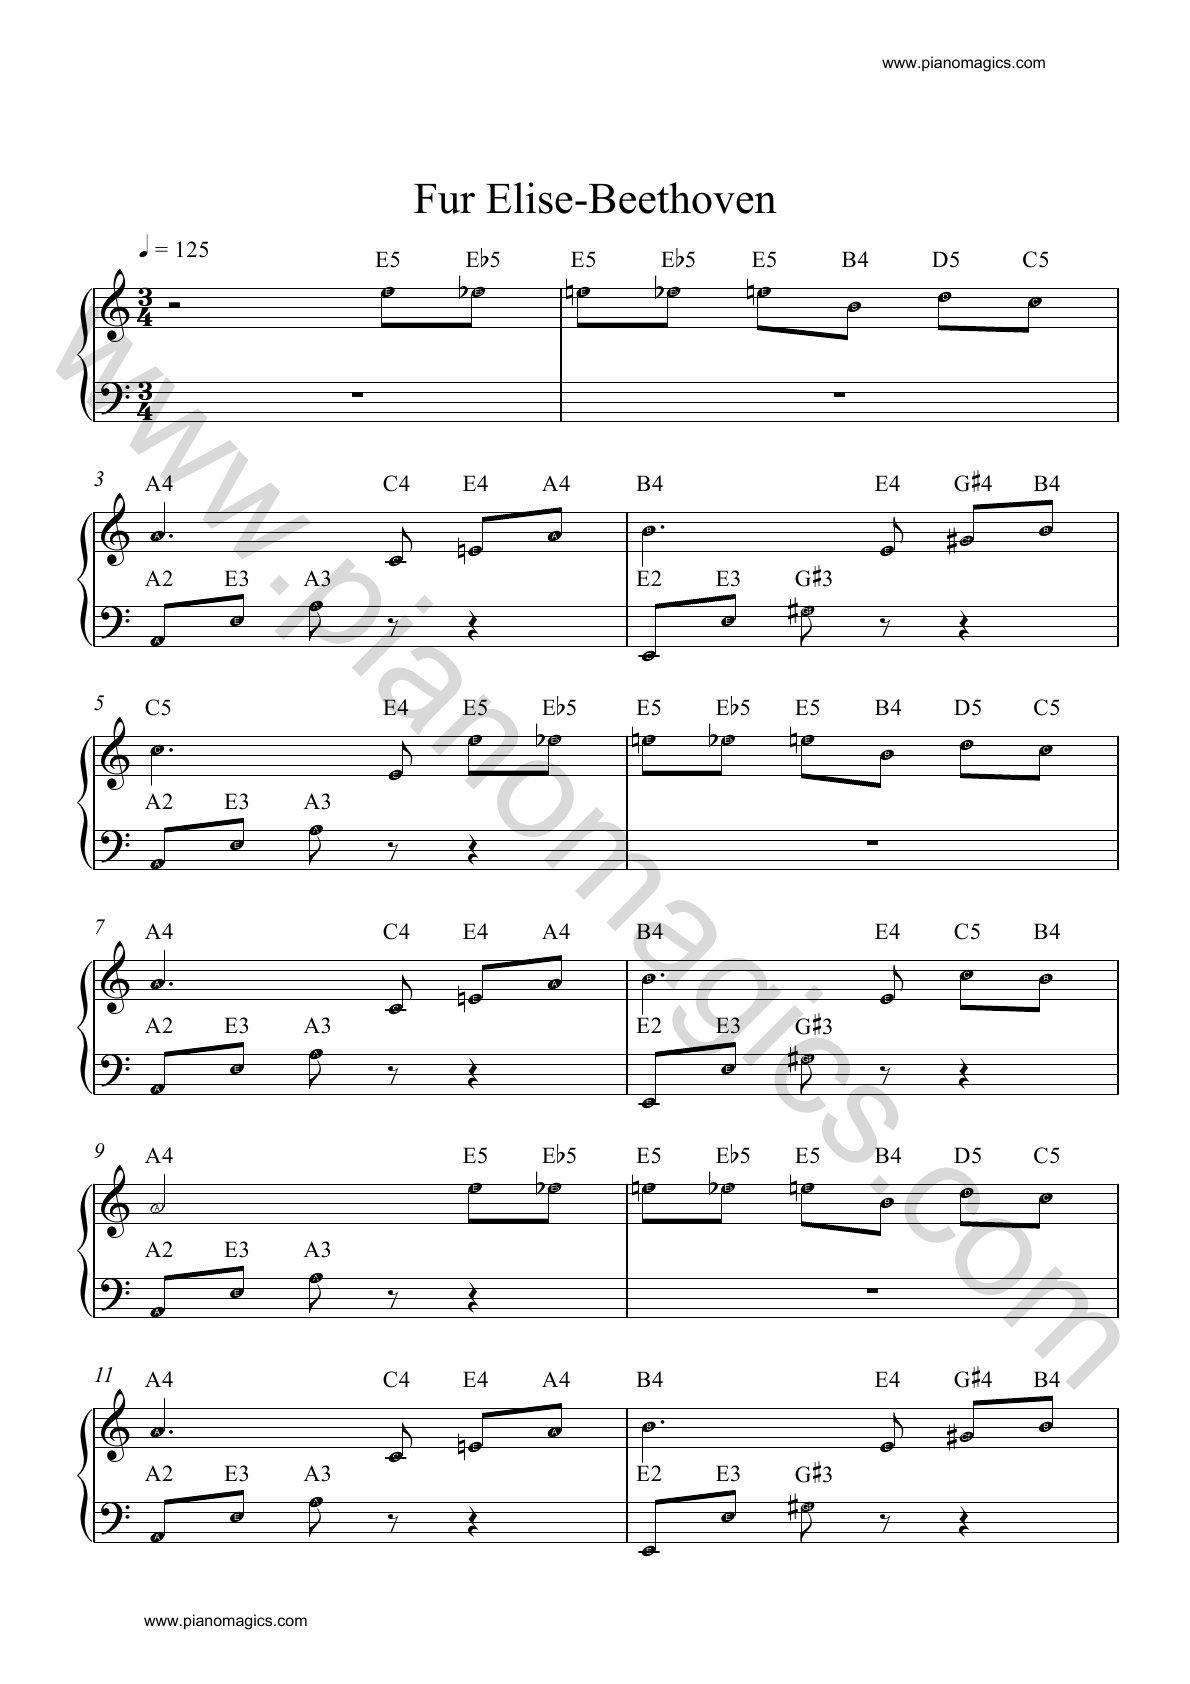 Get Your Fur Elise Sheet Music Along With Notes